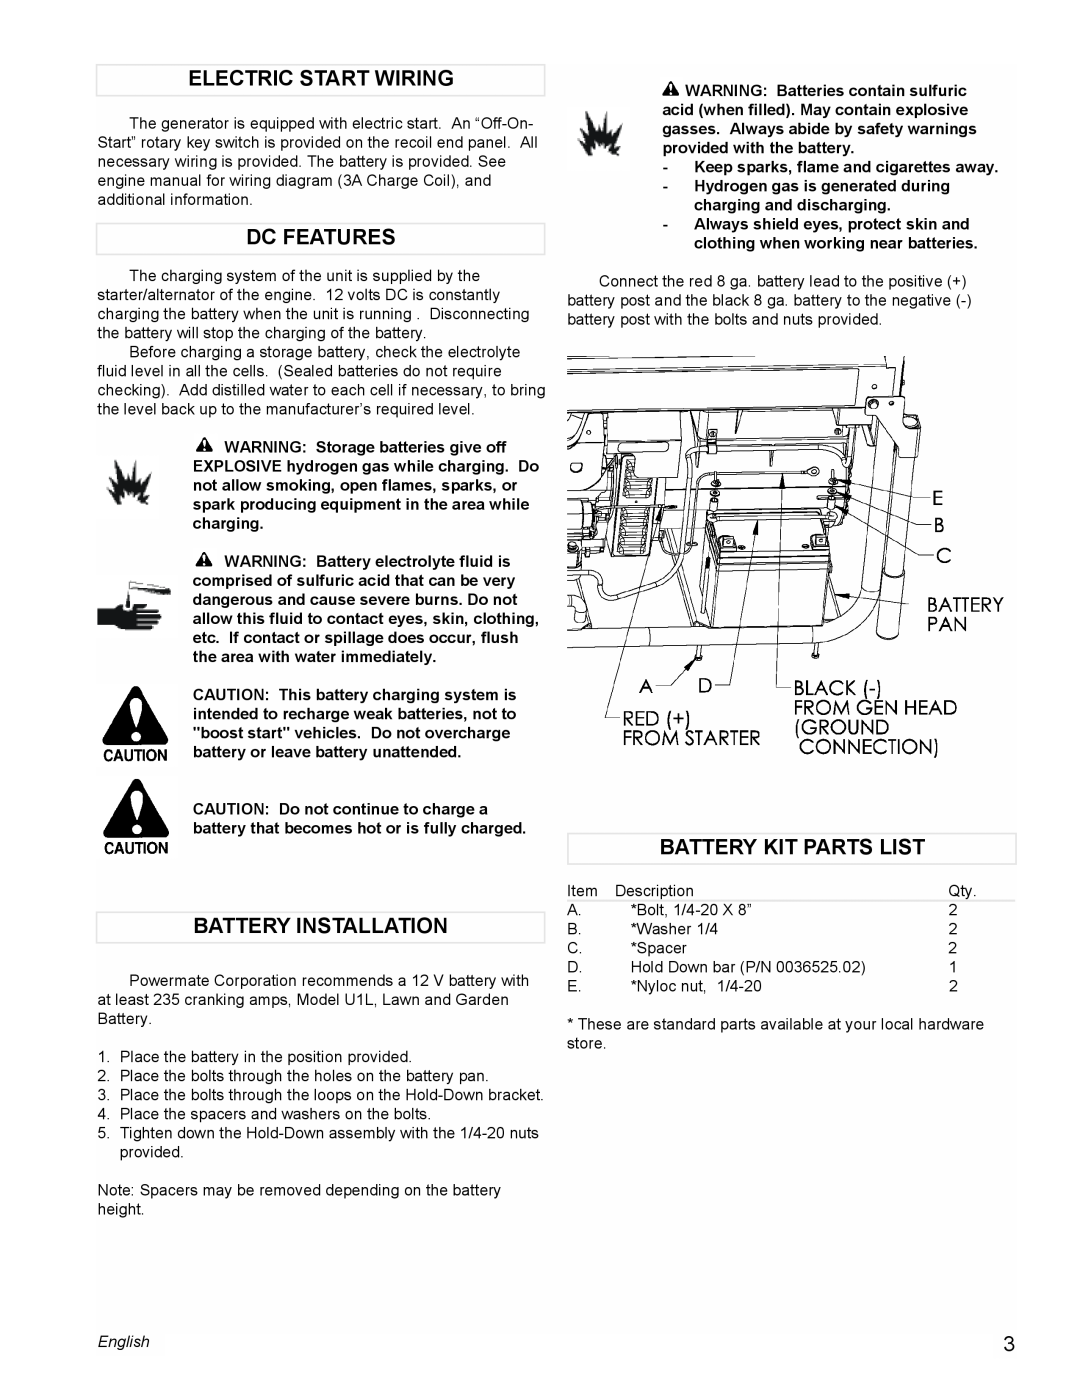 Powermate PM0601350 manual Electric Start Wiring, Dc Features, Battery Installation, Battery Kit Parts List, English 